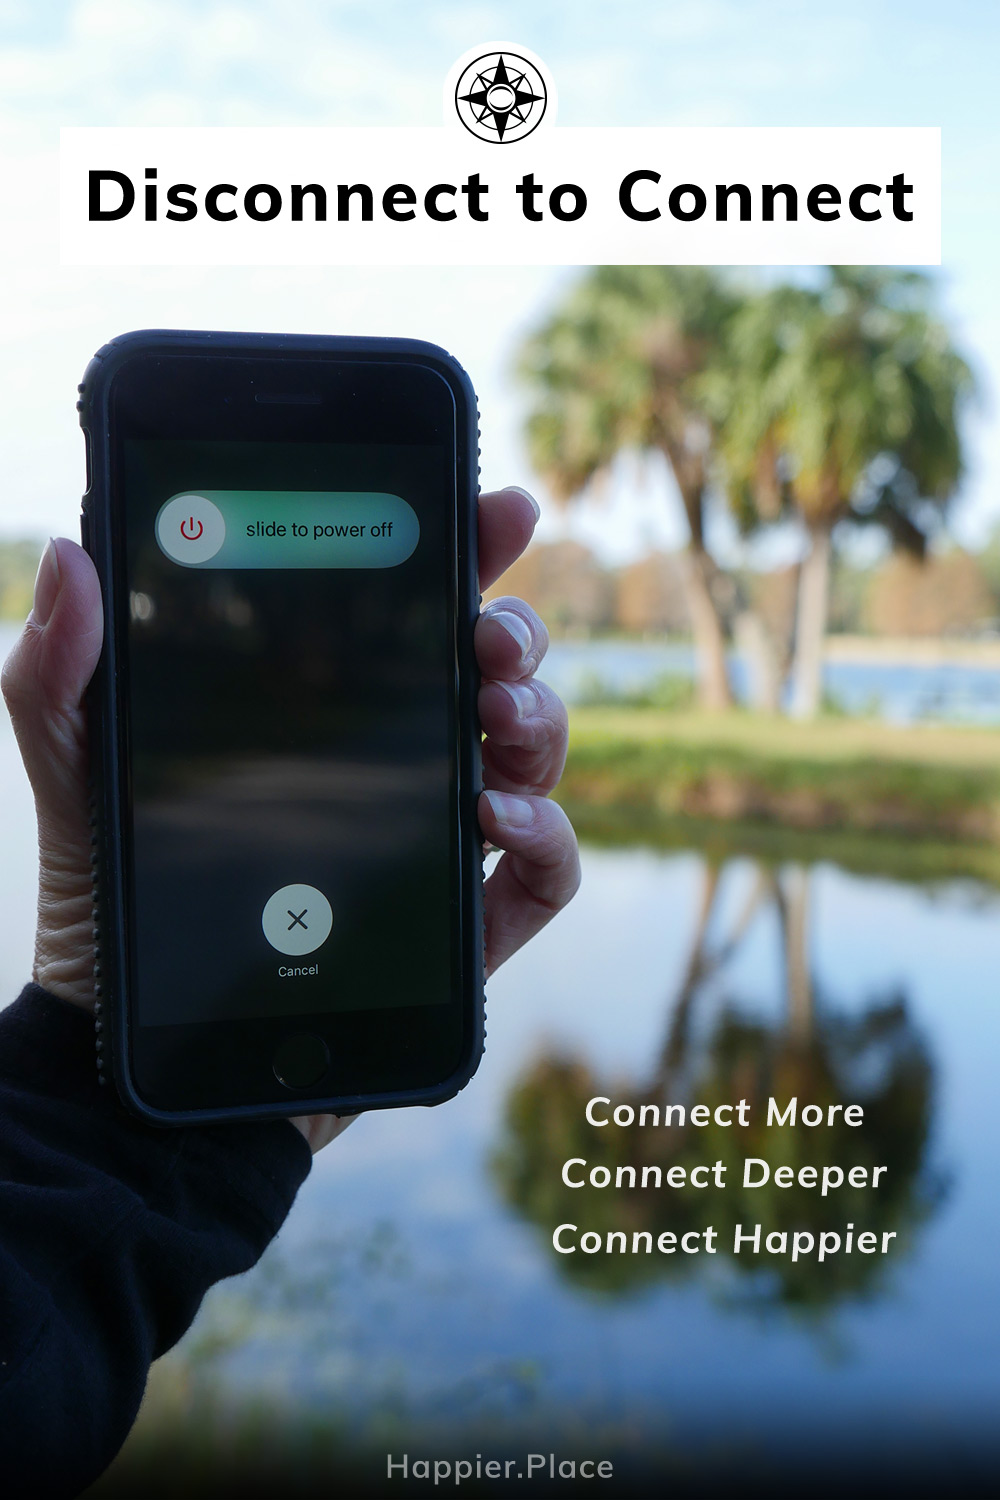 Turn off your smartphone in nature: disconnect to connect more, deeper, happier. 